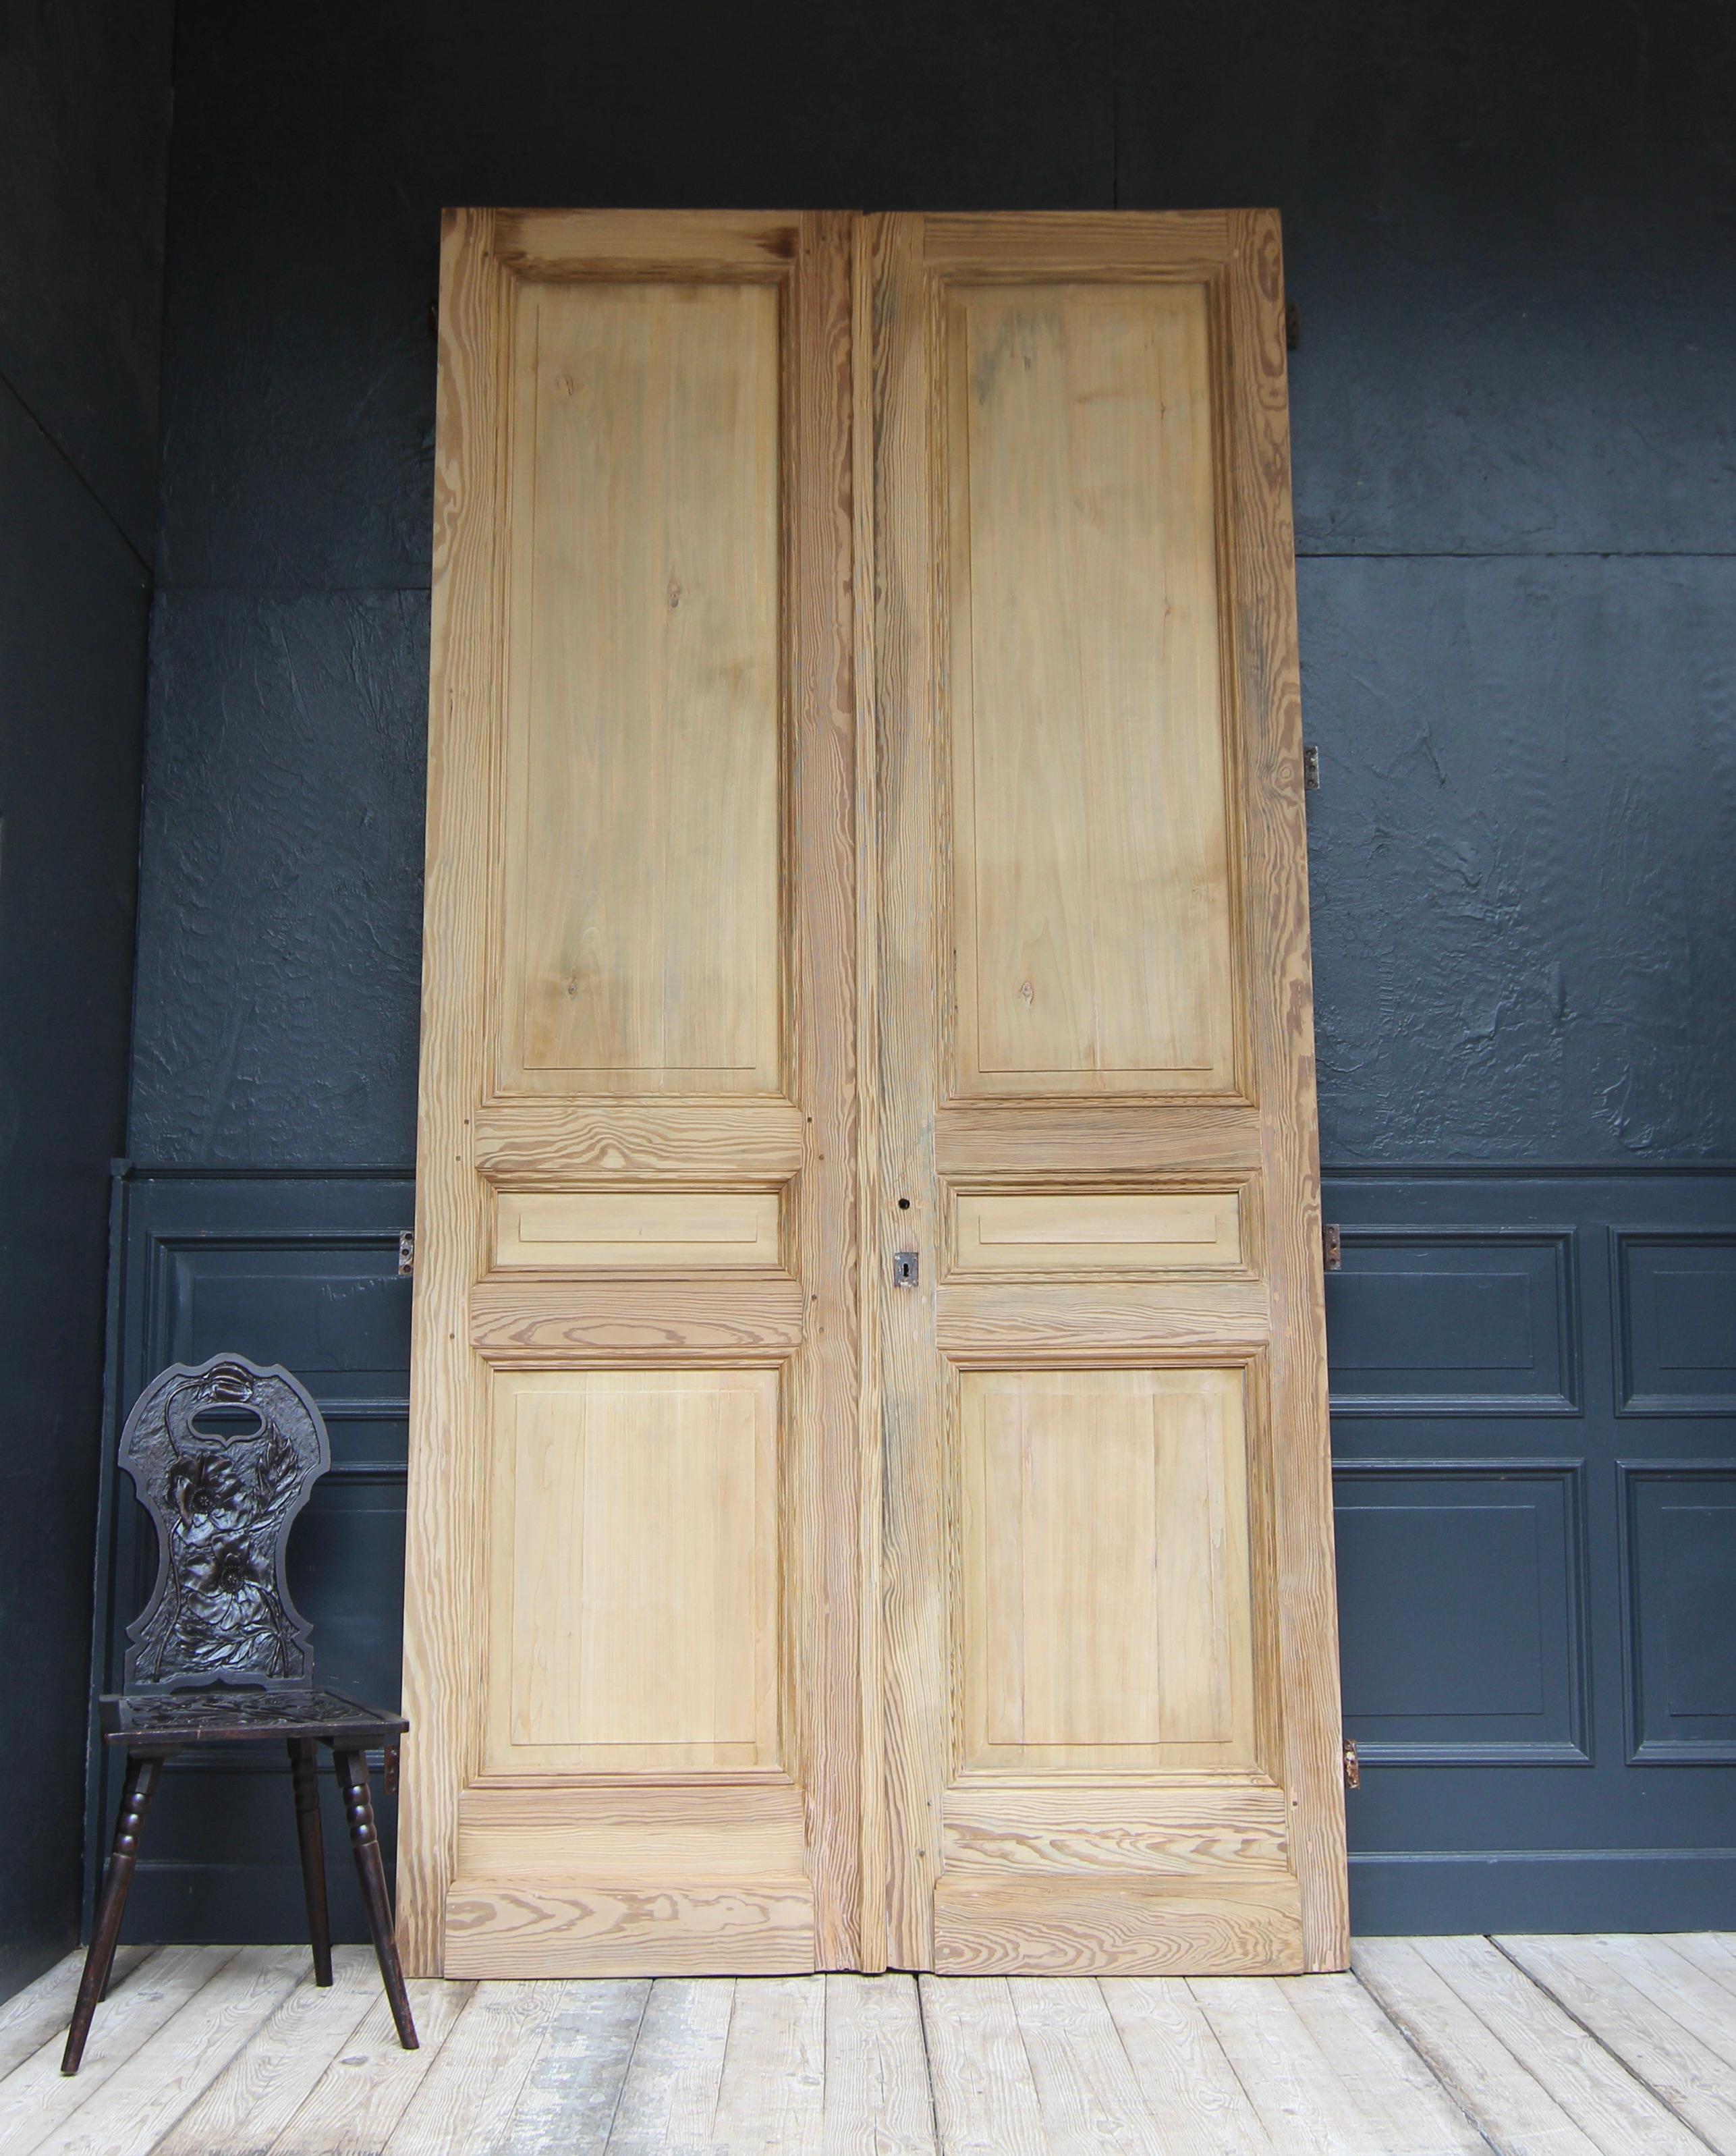 Exceptionally high French double door from the early 20th century, probably around 1910. Solidly made of pine.

Double-leaf residential door in frame construction with 3 panelled panels per door leaf.

The double door can be installed with 4 iron